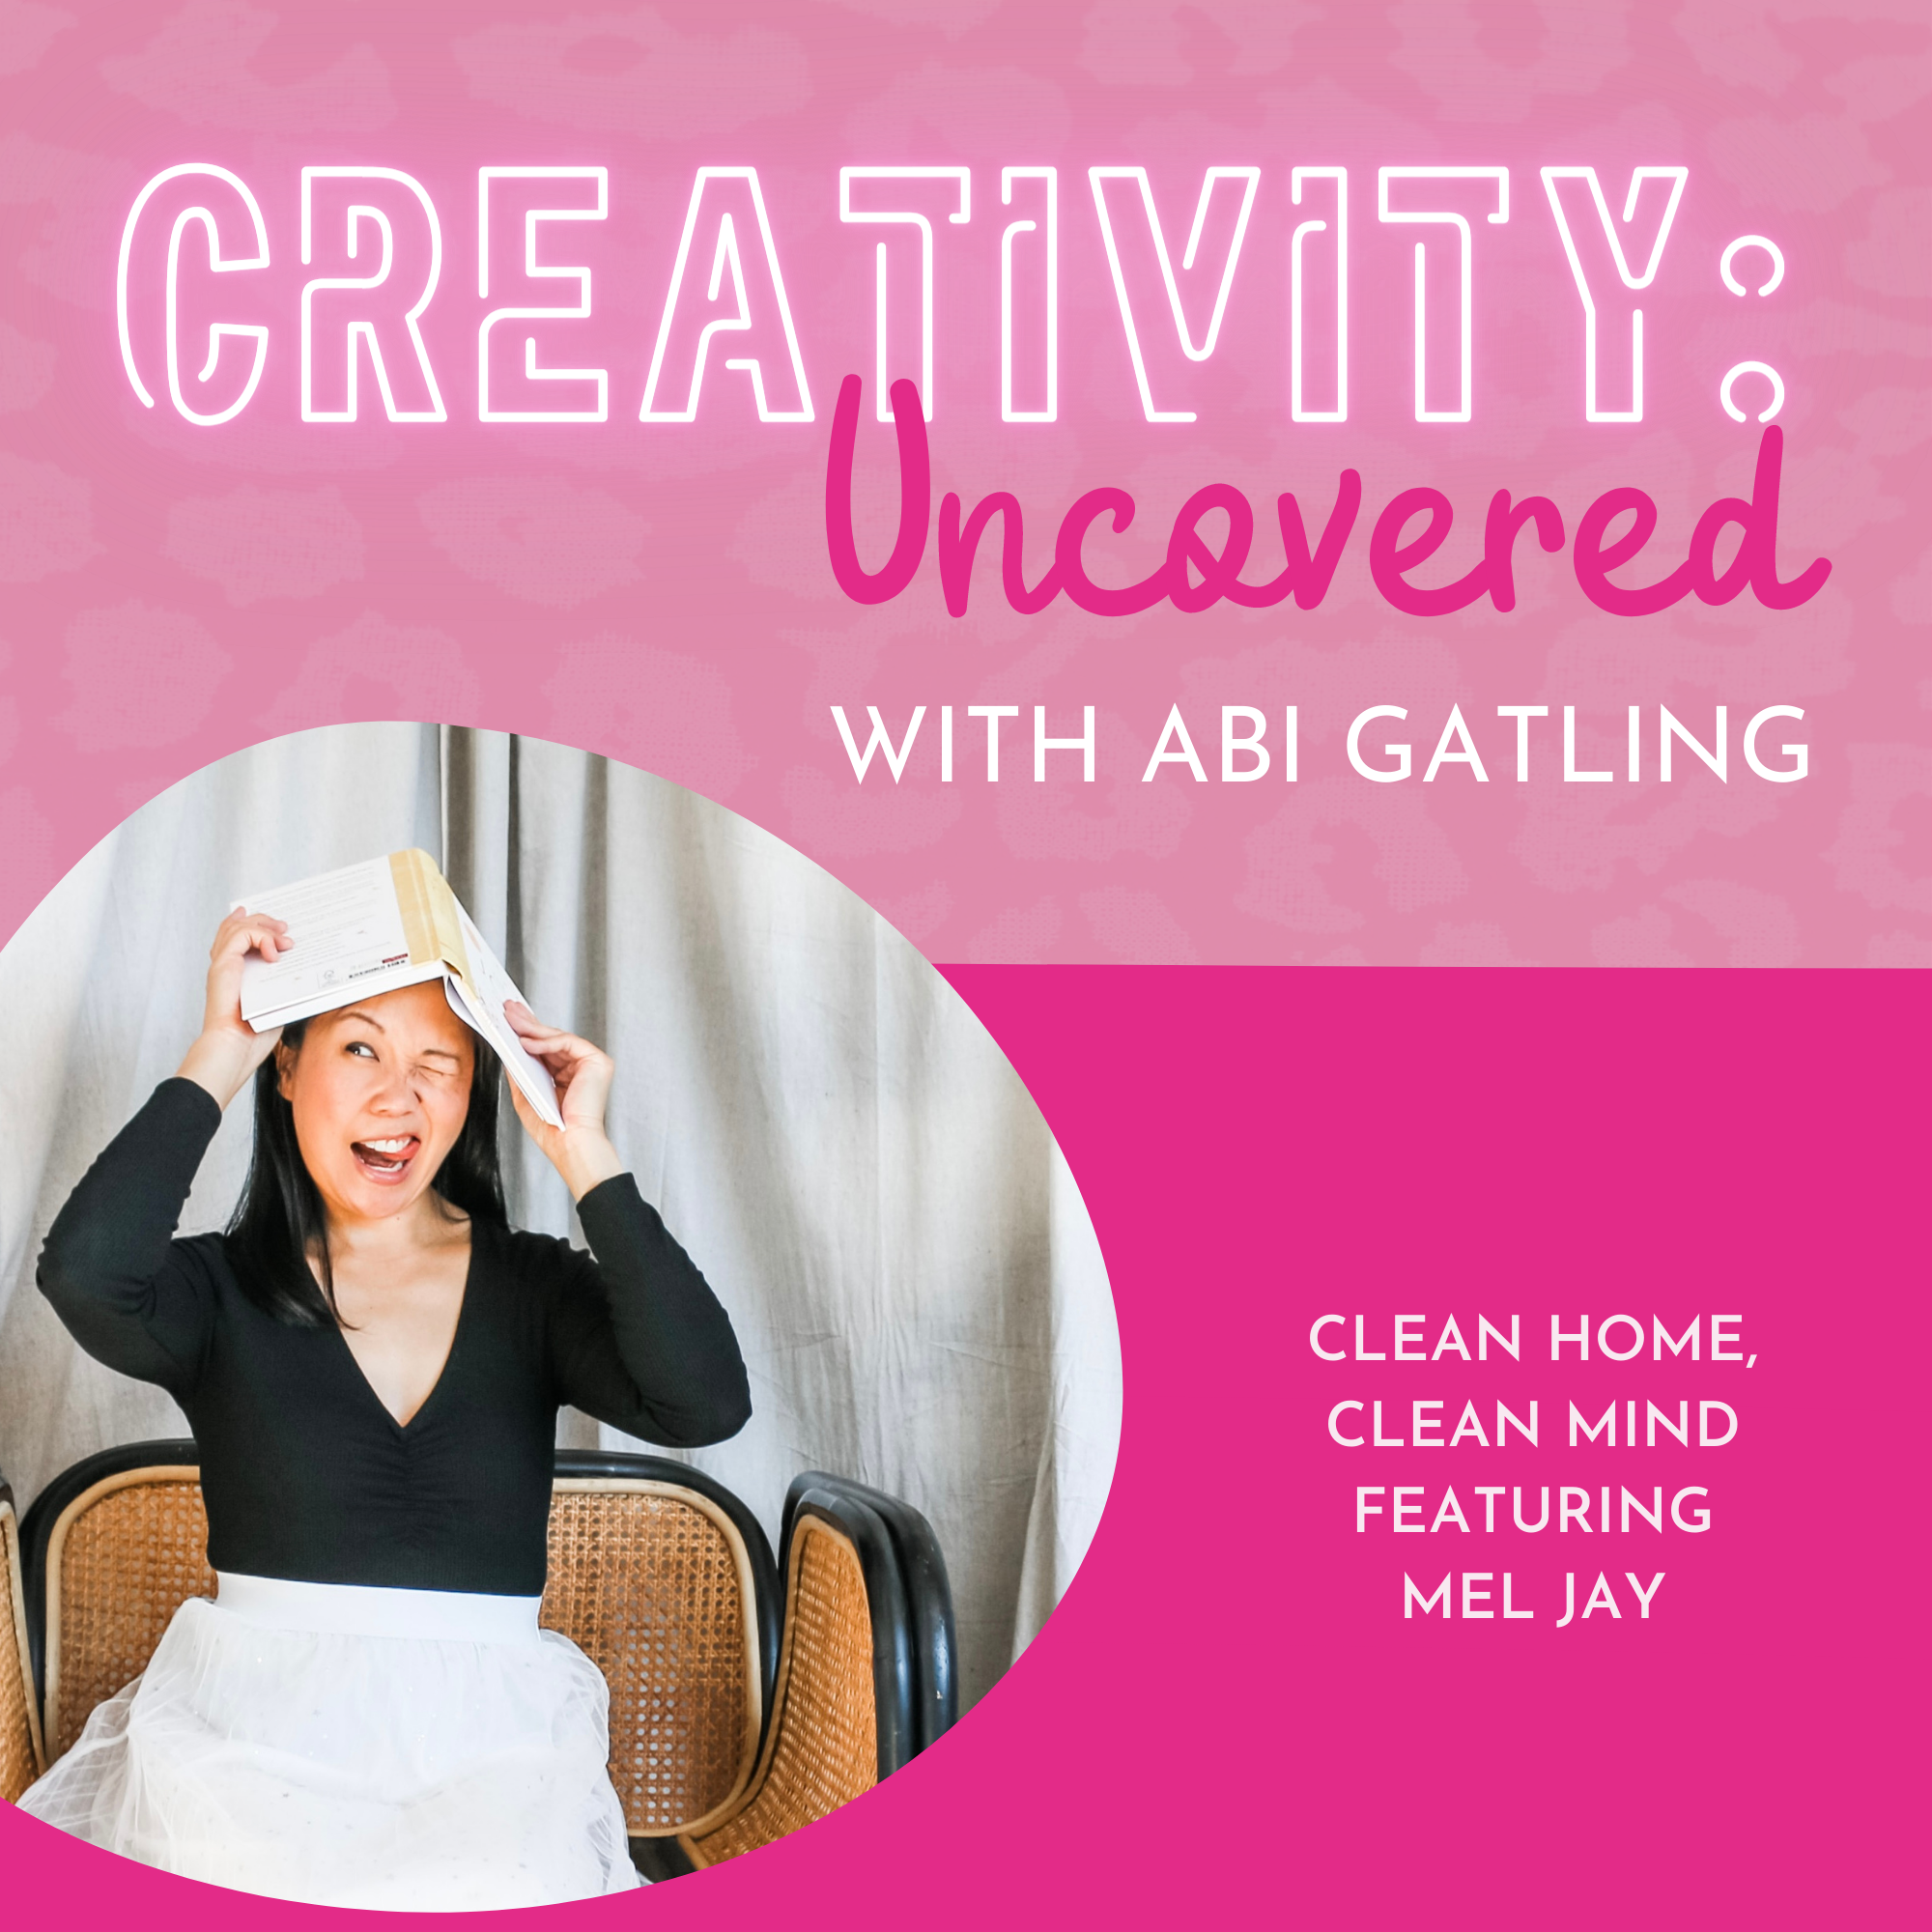 Creativity: Uncovered podcast episode graphic featuring guest Mel Jay